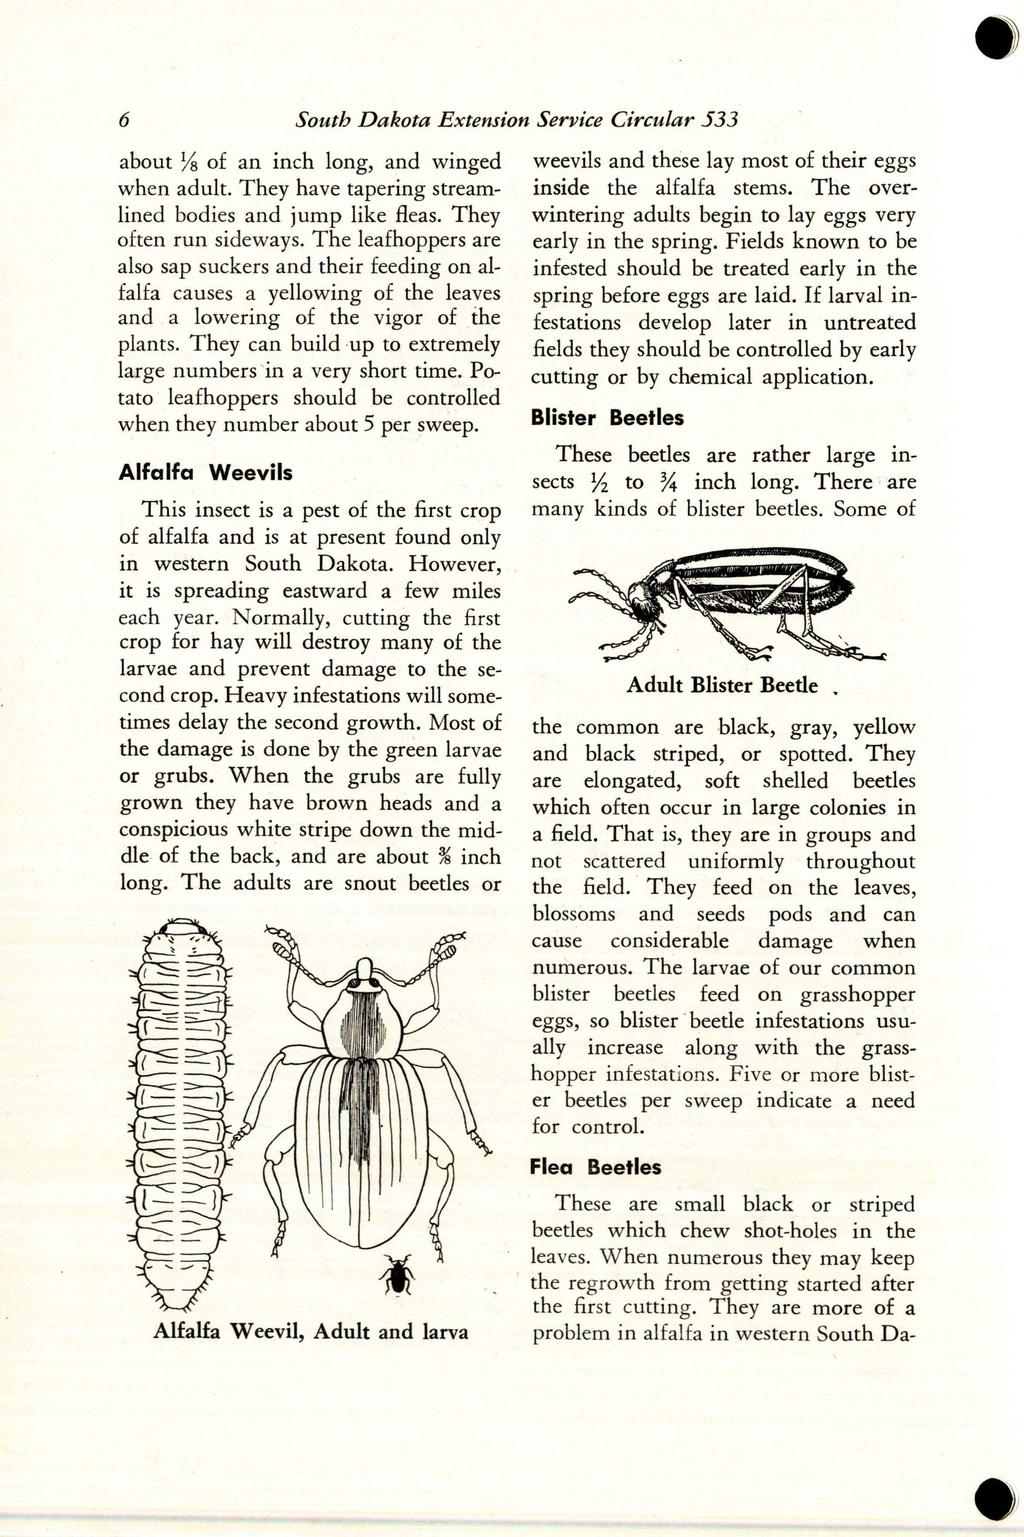 6 South Dakota Extension Service Circular 533 about ¼ of an inch long, and winged when adult. They have tapering streamlined bodies and jump like fleas. They often run sideways.